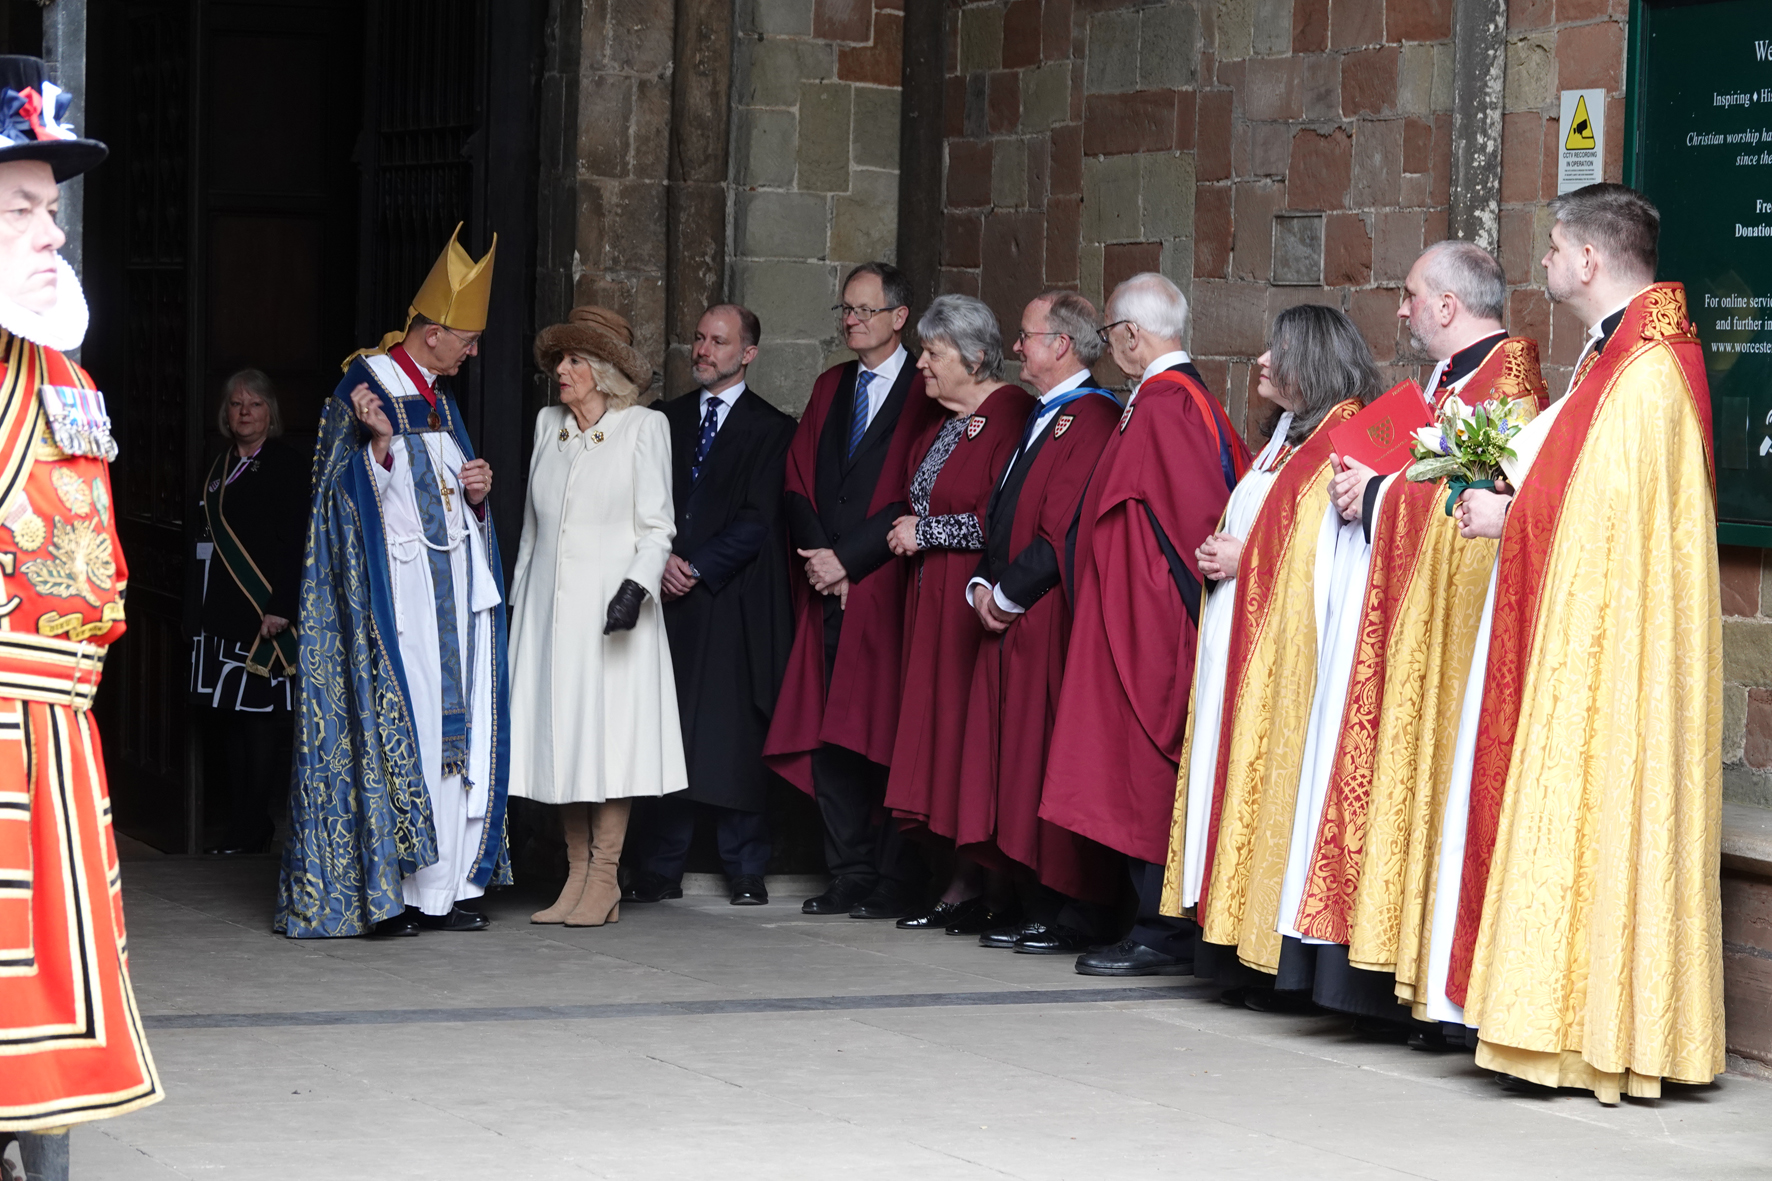 The Queen is greeted by Bishop John as she arrives at the Cathedral